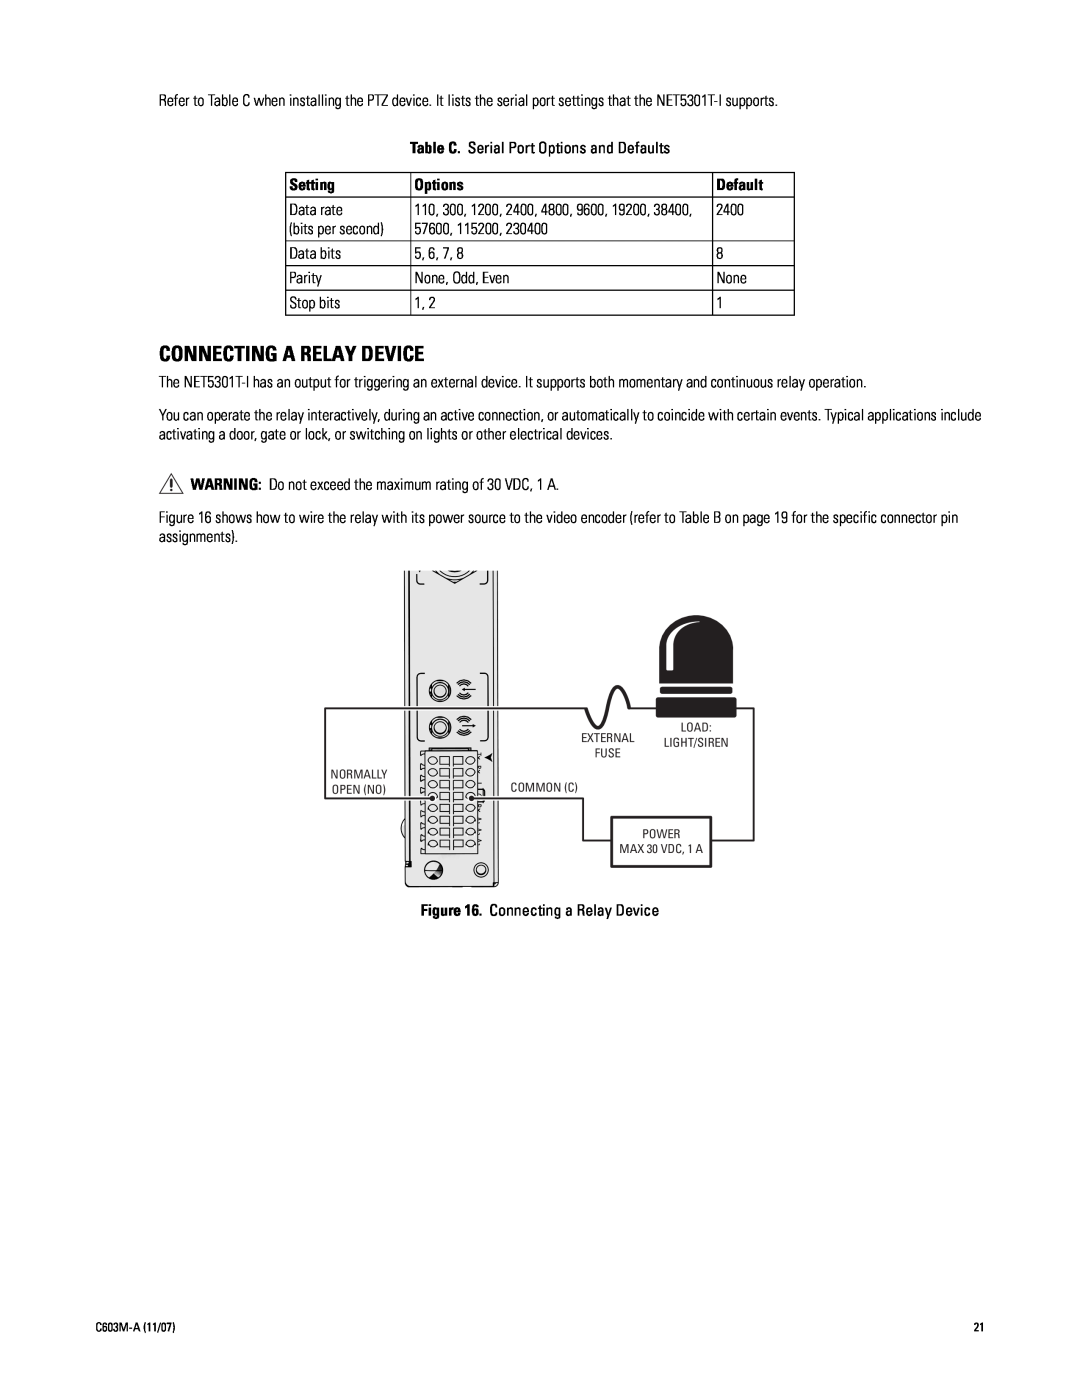 Pelco C603M-A (11/07) manual Connecting A Relay Device, Setting, Options, Default 